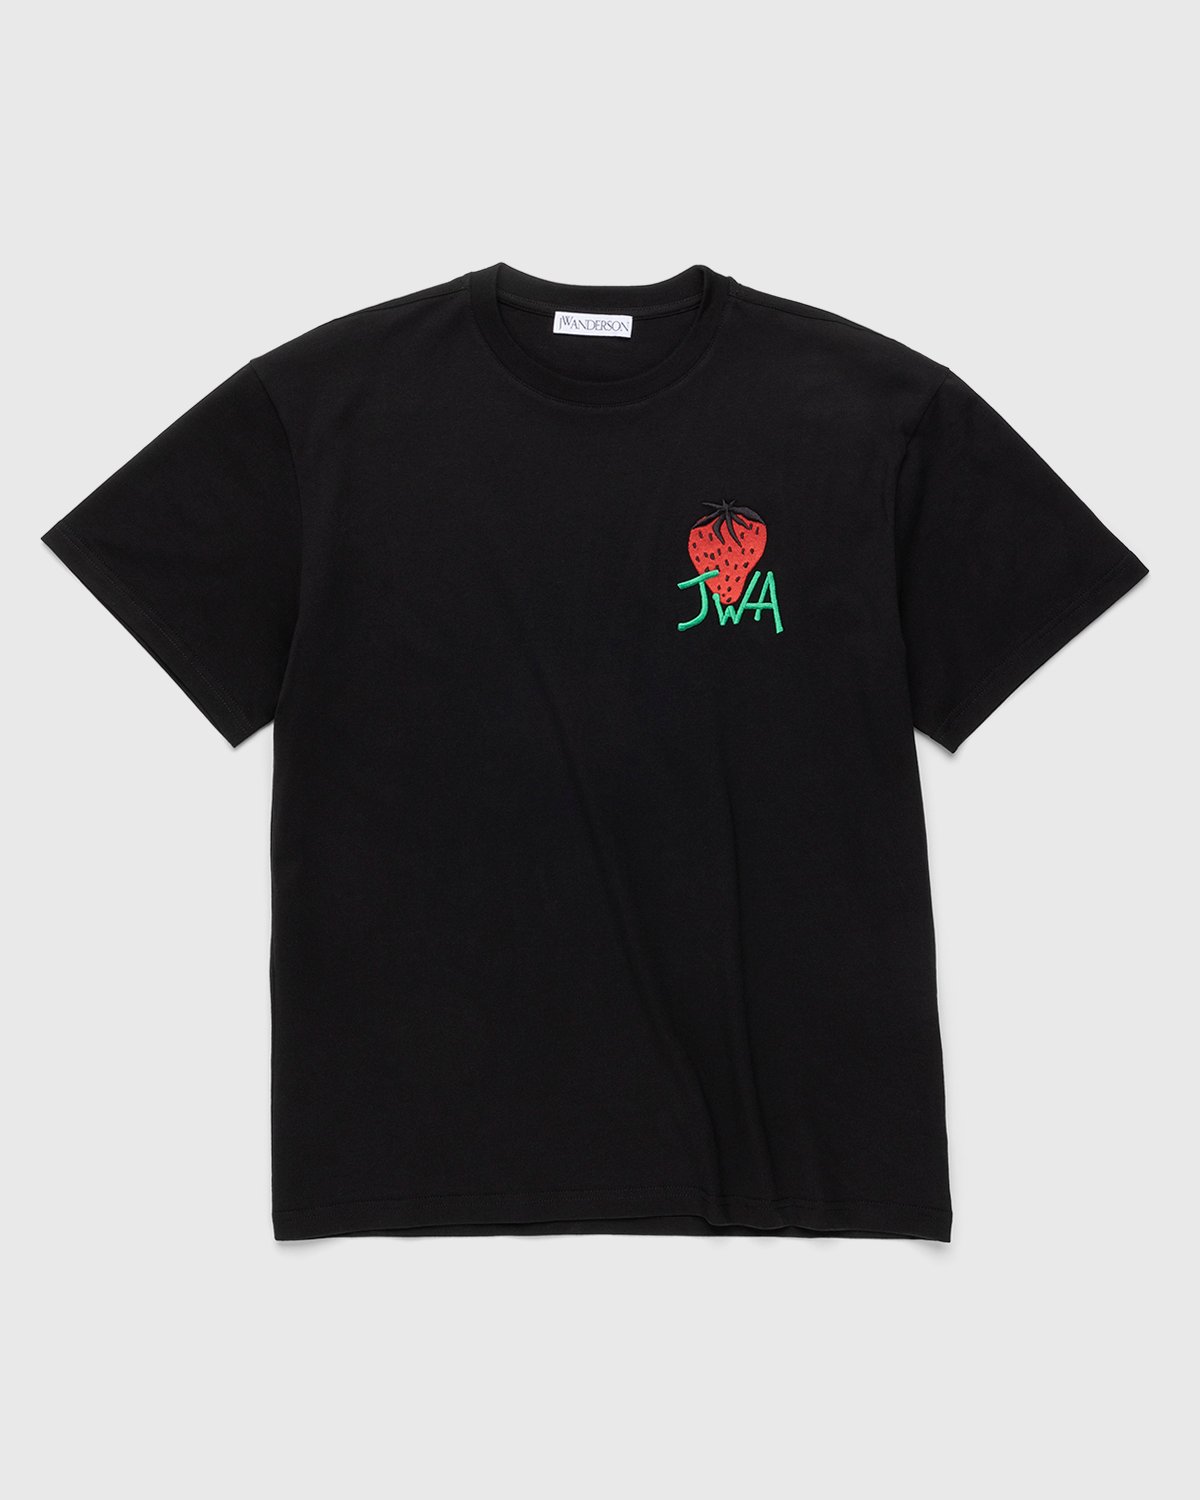 J.W. Anderson - Embroidered Strawberry JWA T-Shirt Black - Clothing - Black - Image 1